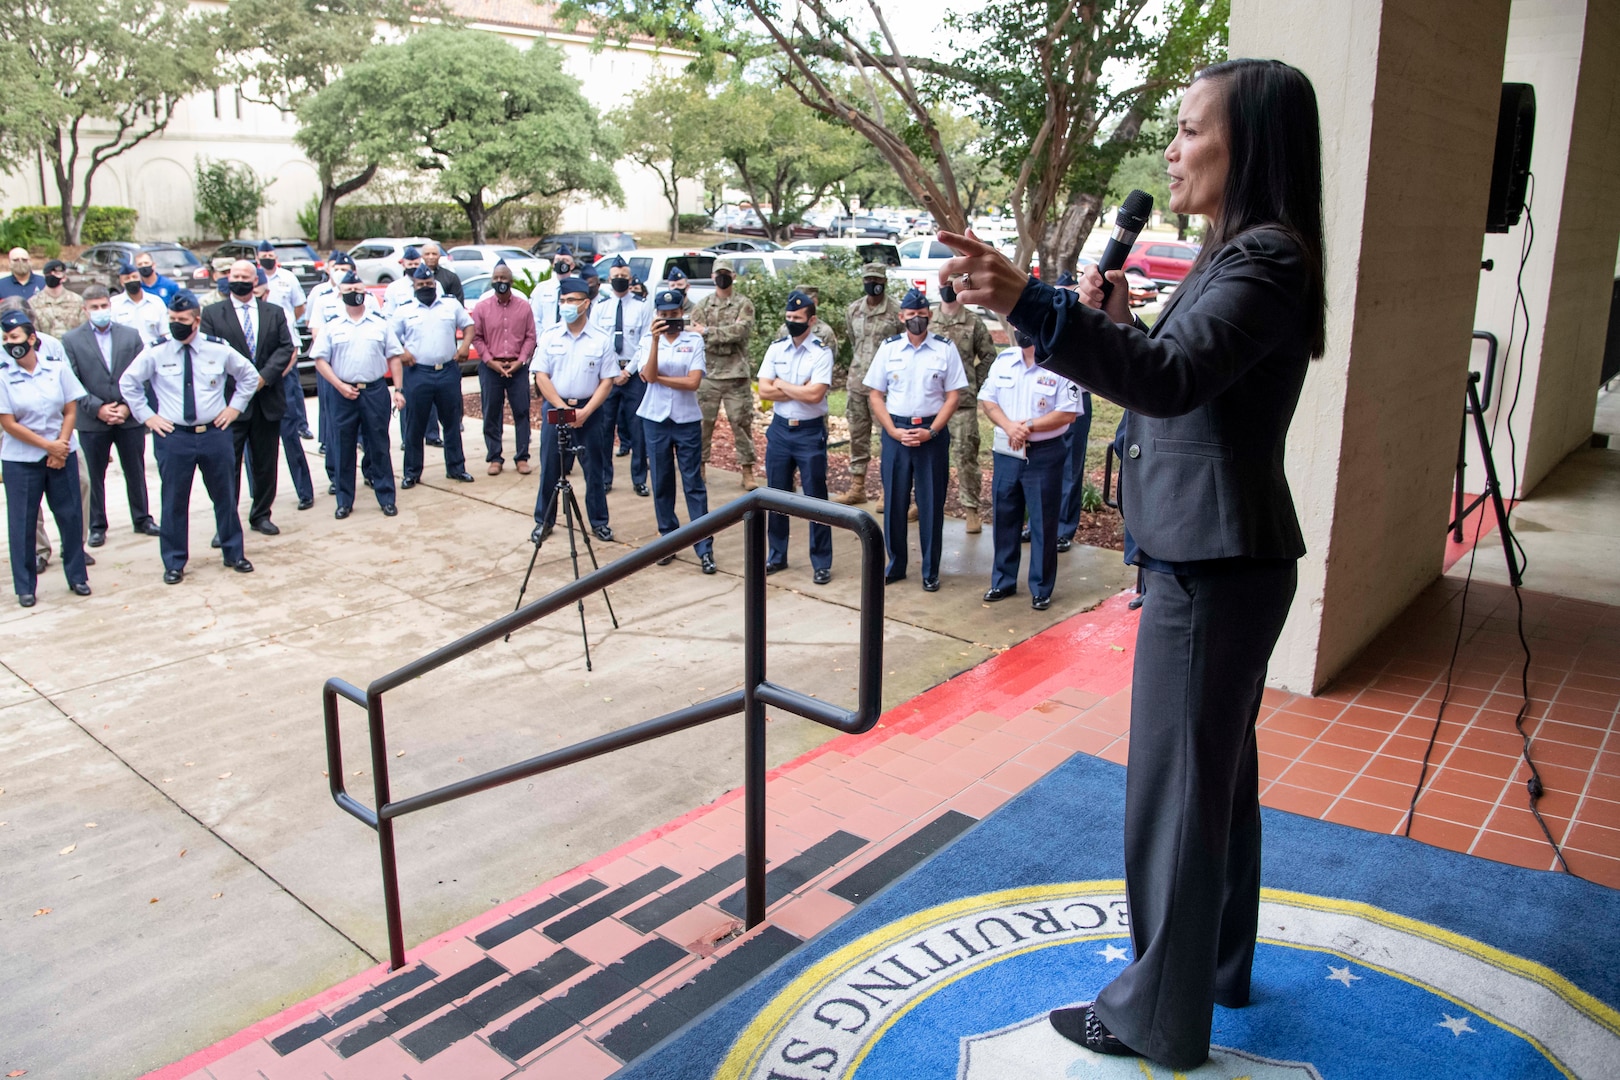 Undersecretary of the Air Force talks to members of the Air Force Recruiting Service.